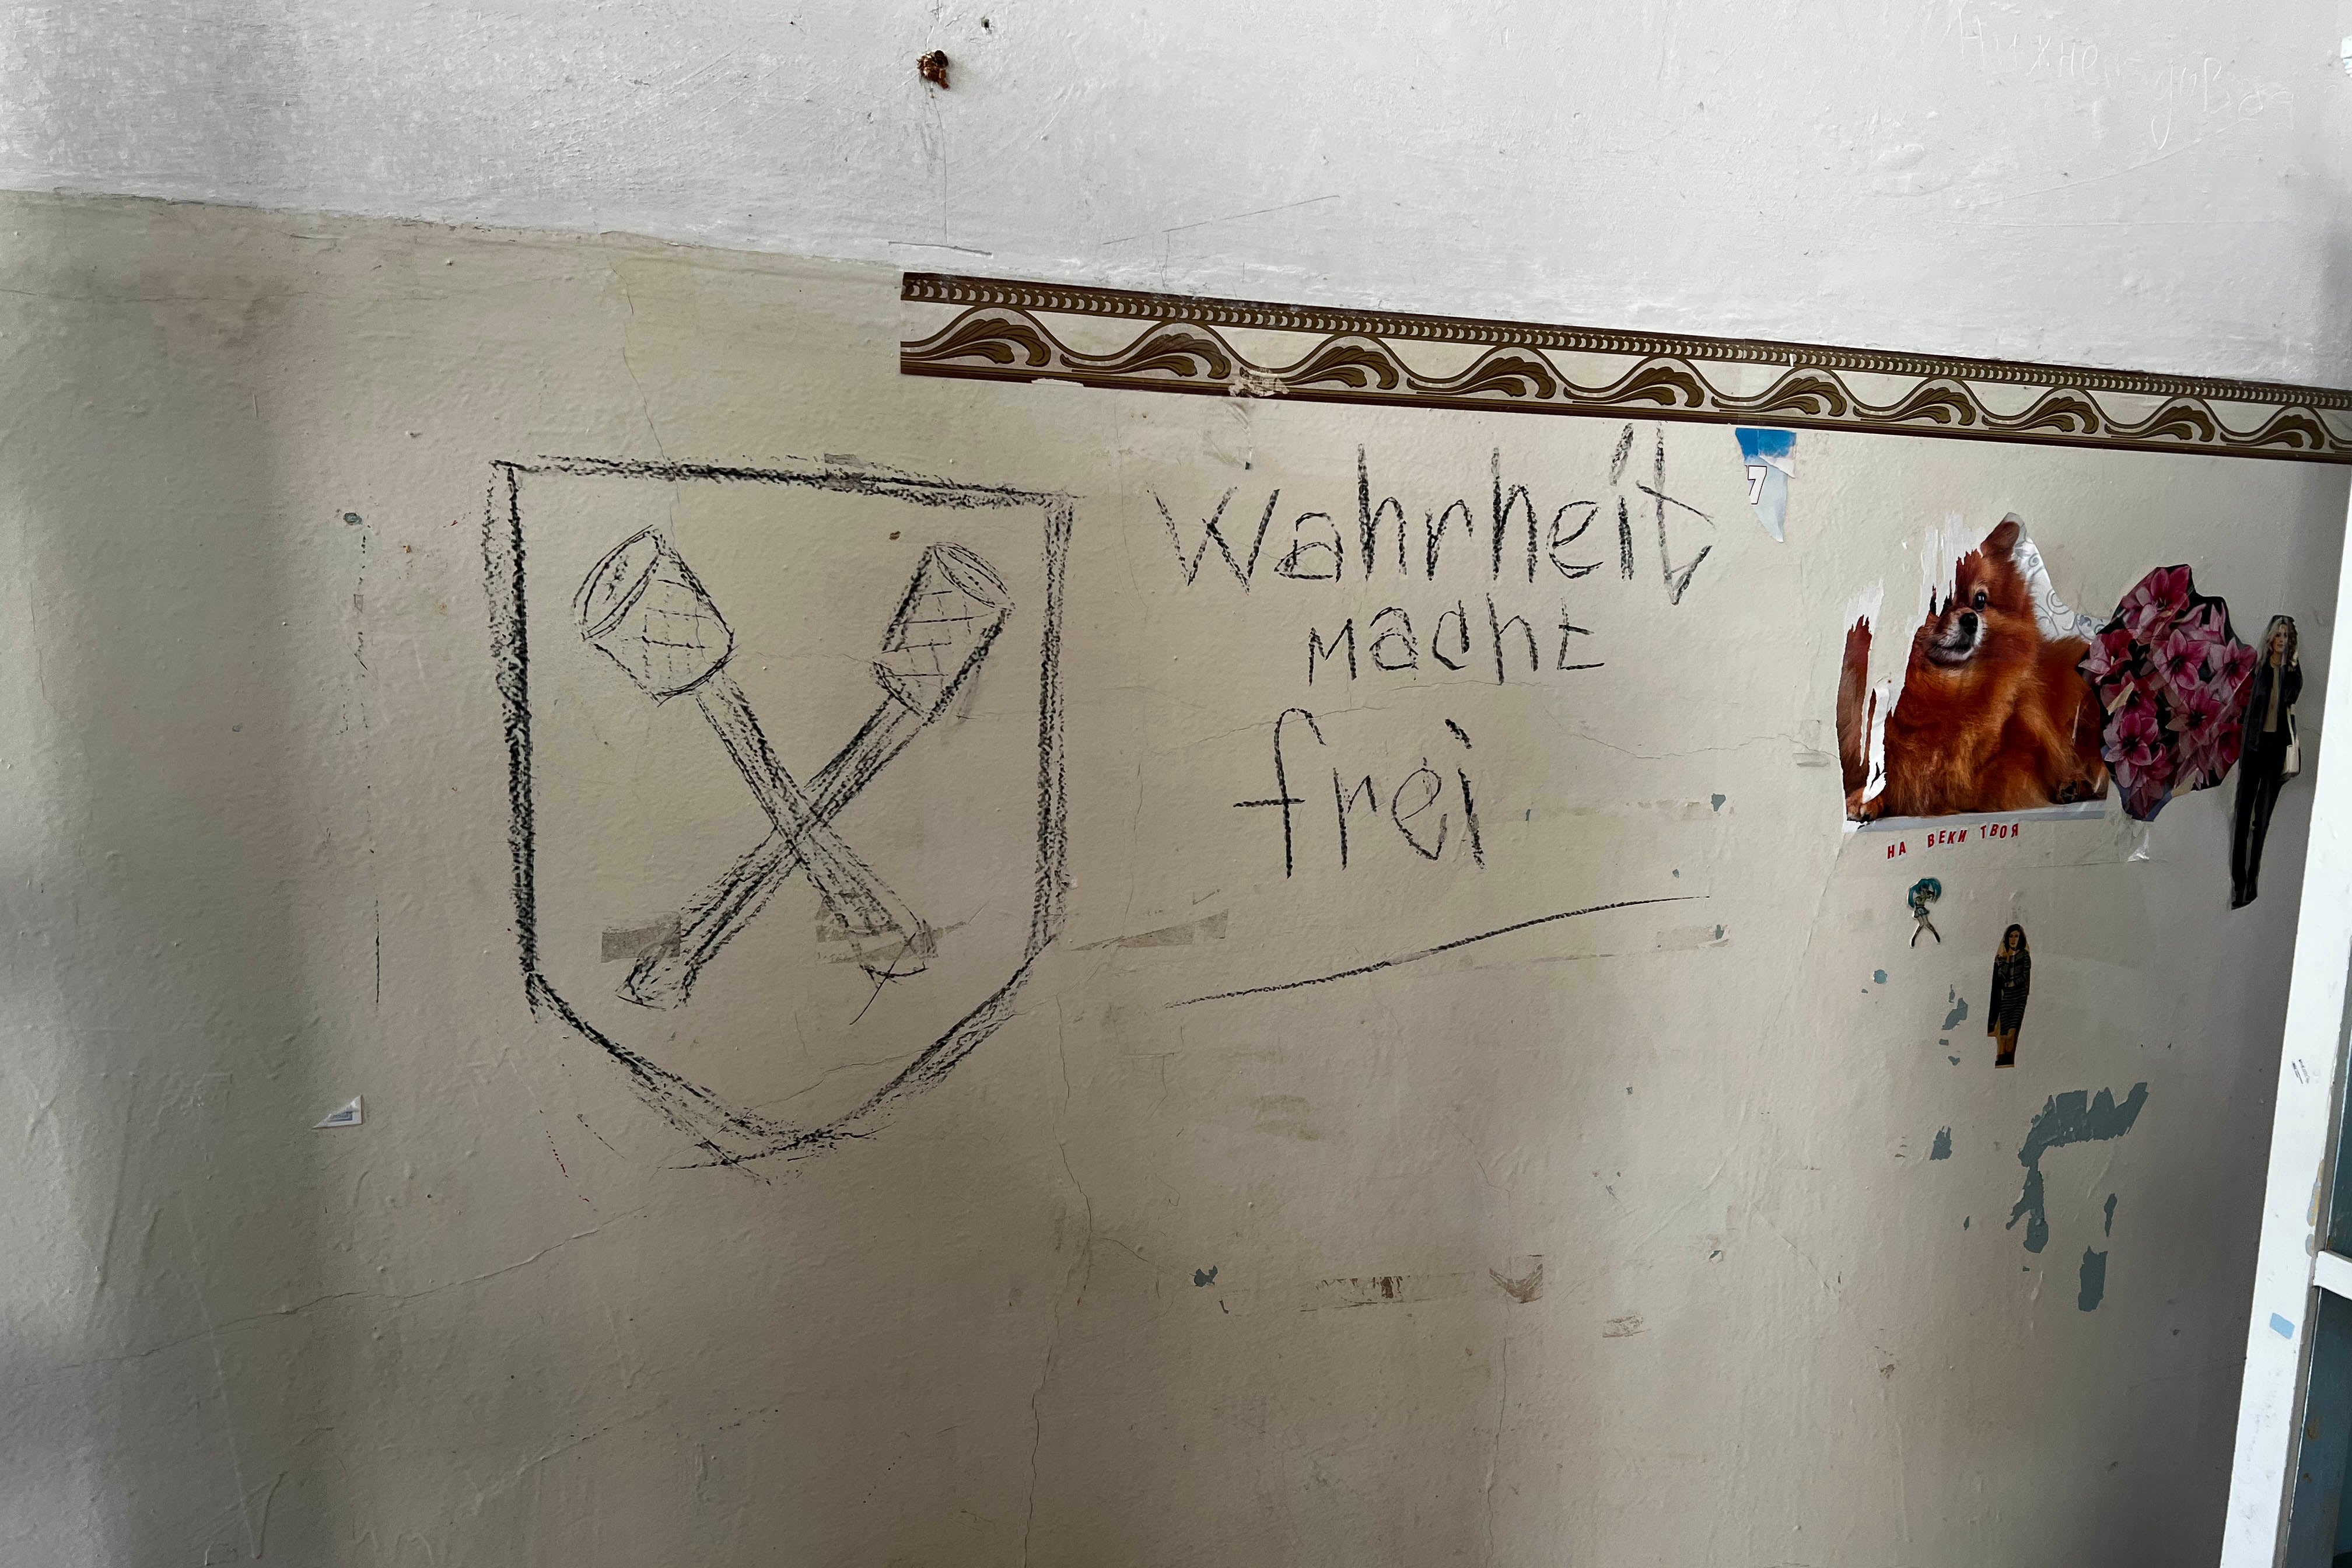 The German words “Truth Sets You Free” written on the wall in one of the City Railway Polyclinic rooms, and an emblem that might depict crossed stick grenades, which was the symbol of a German SS brigade from World War II, the Dirlewanger Brigade, in Izium, Ukraine, September 22, 2022